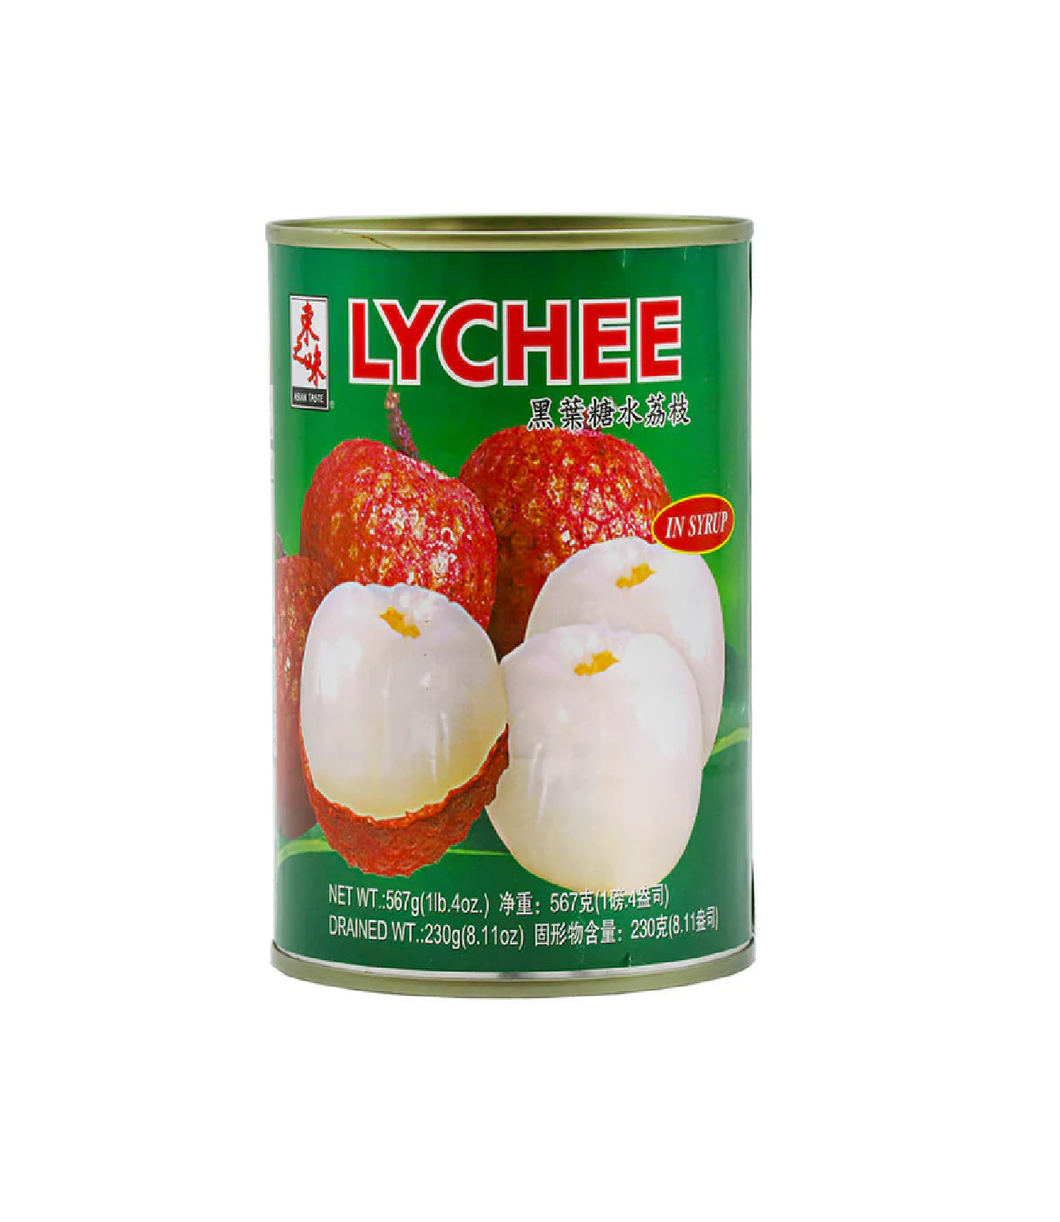 ASIAN TASTE LYCHEE IN SYRUP 20 OZ